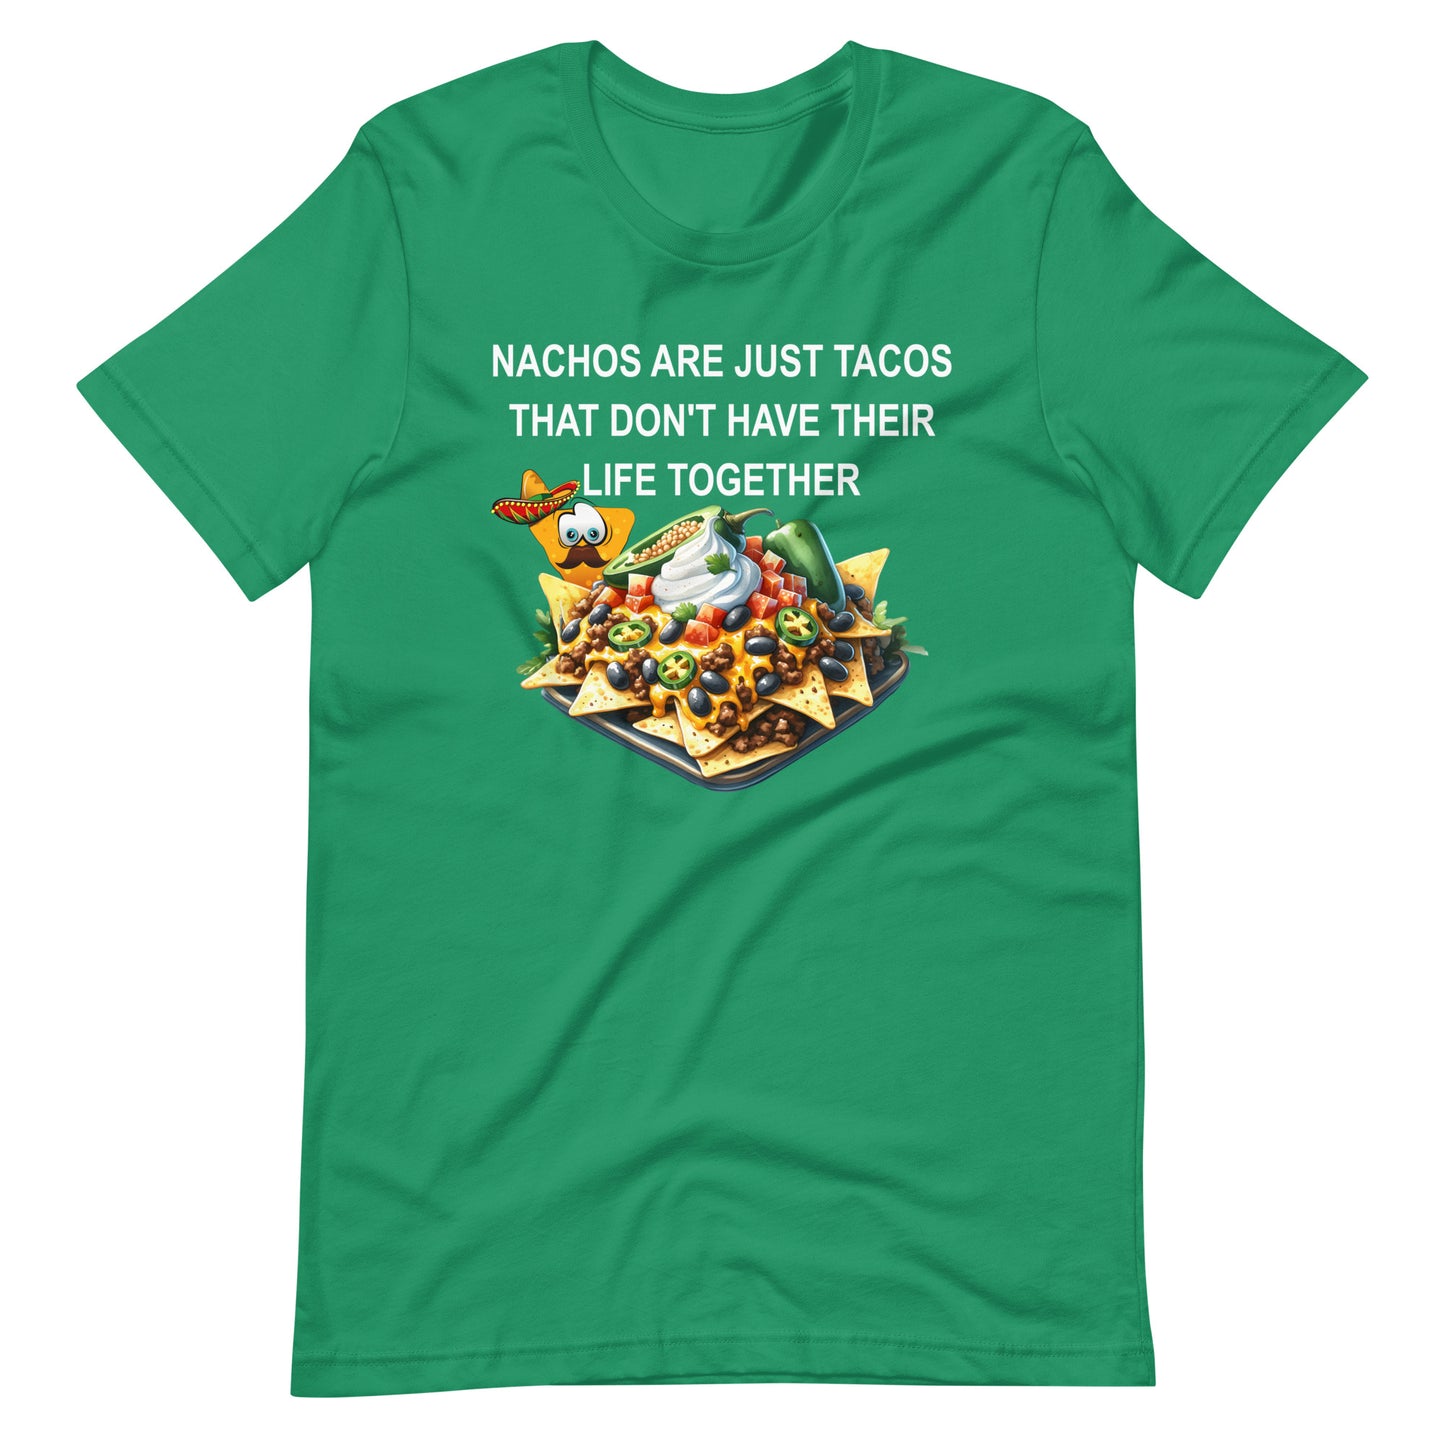 Nachos Are Just Tacos That Don't Have Life Together T-shirt